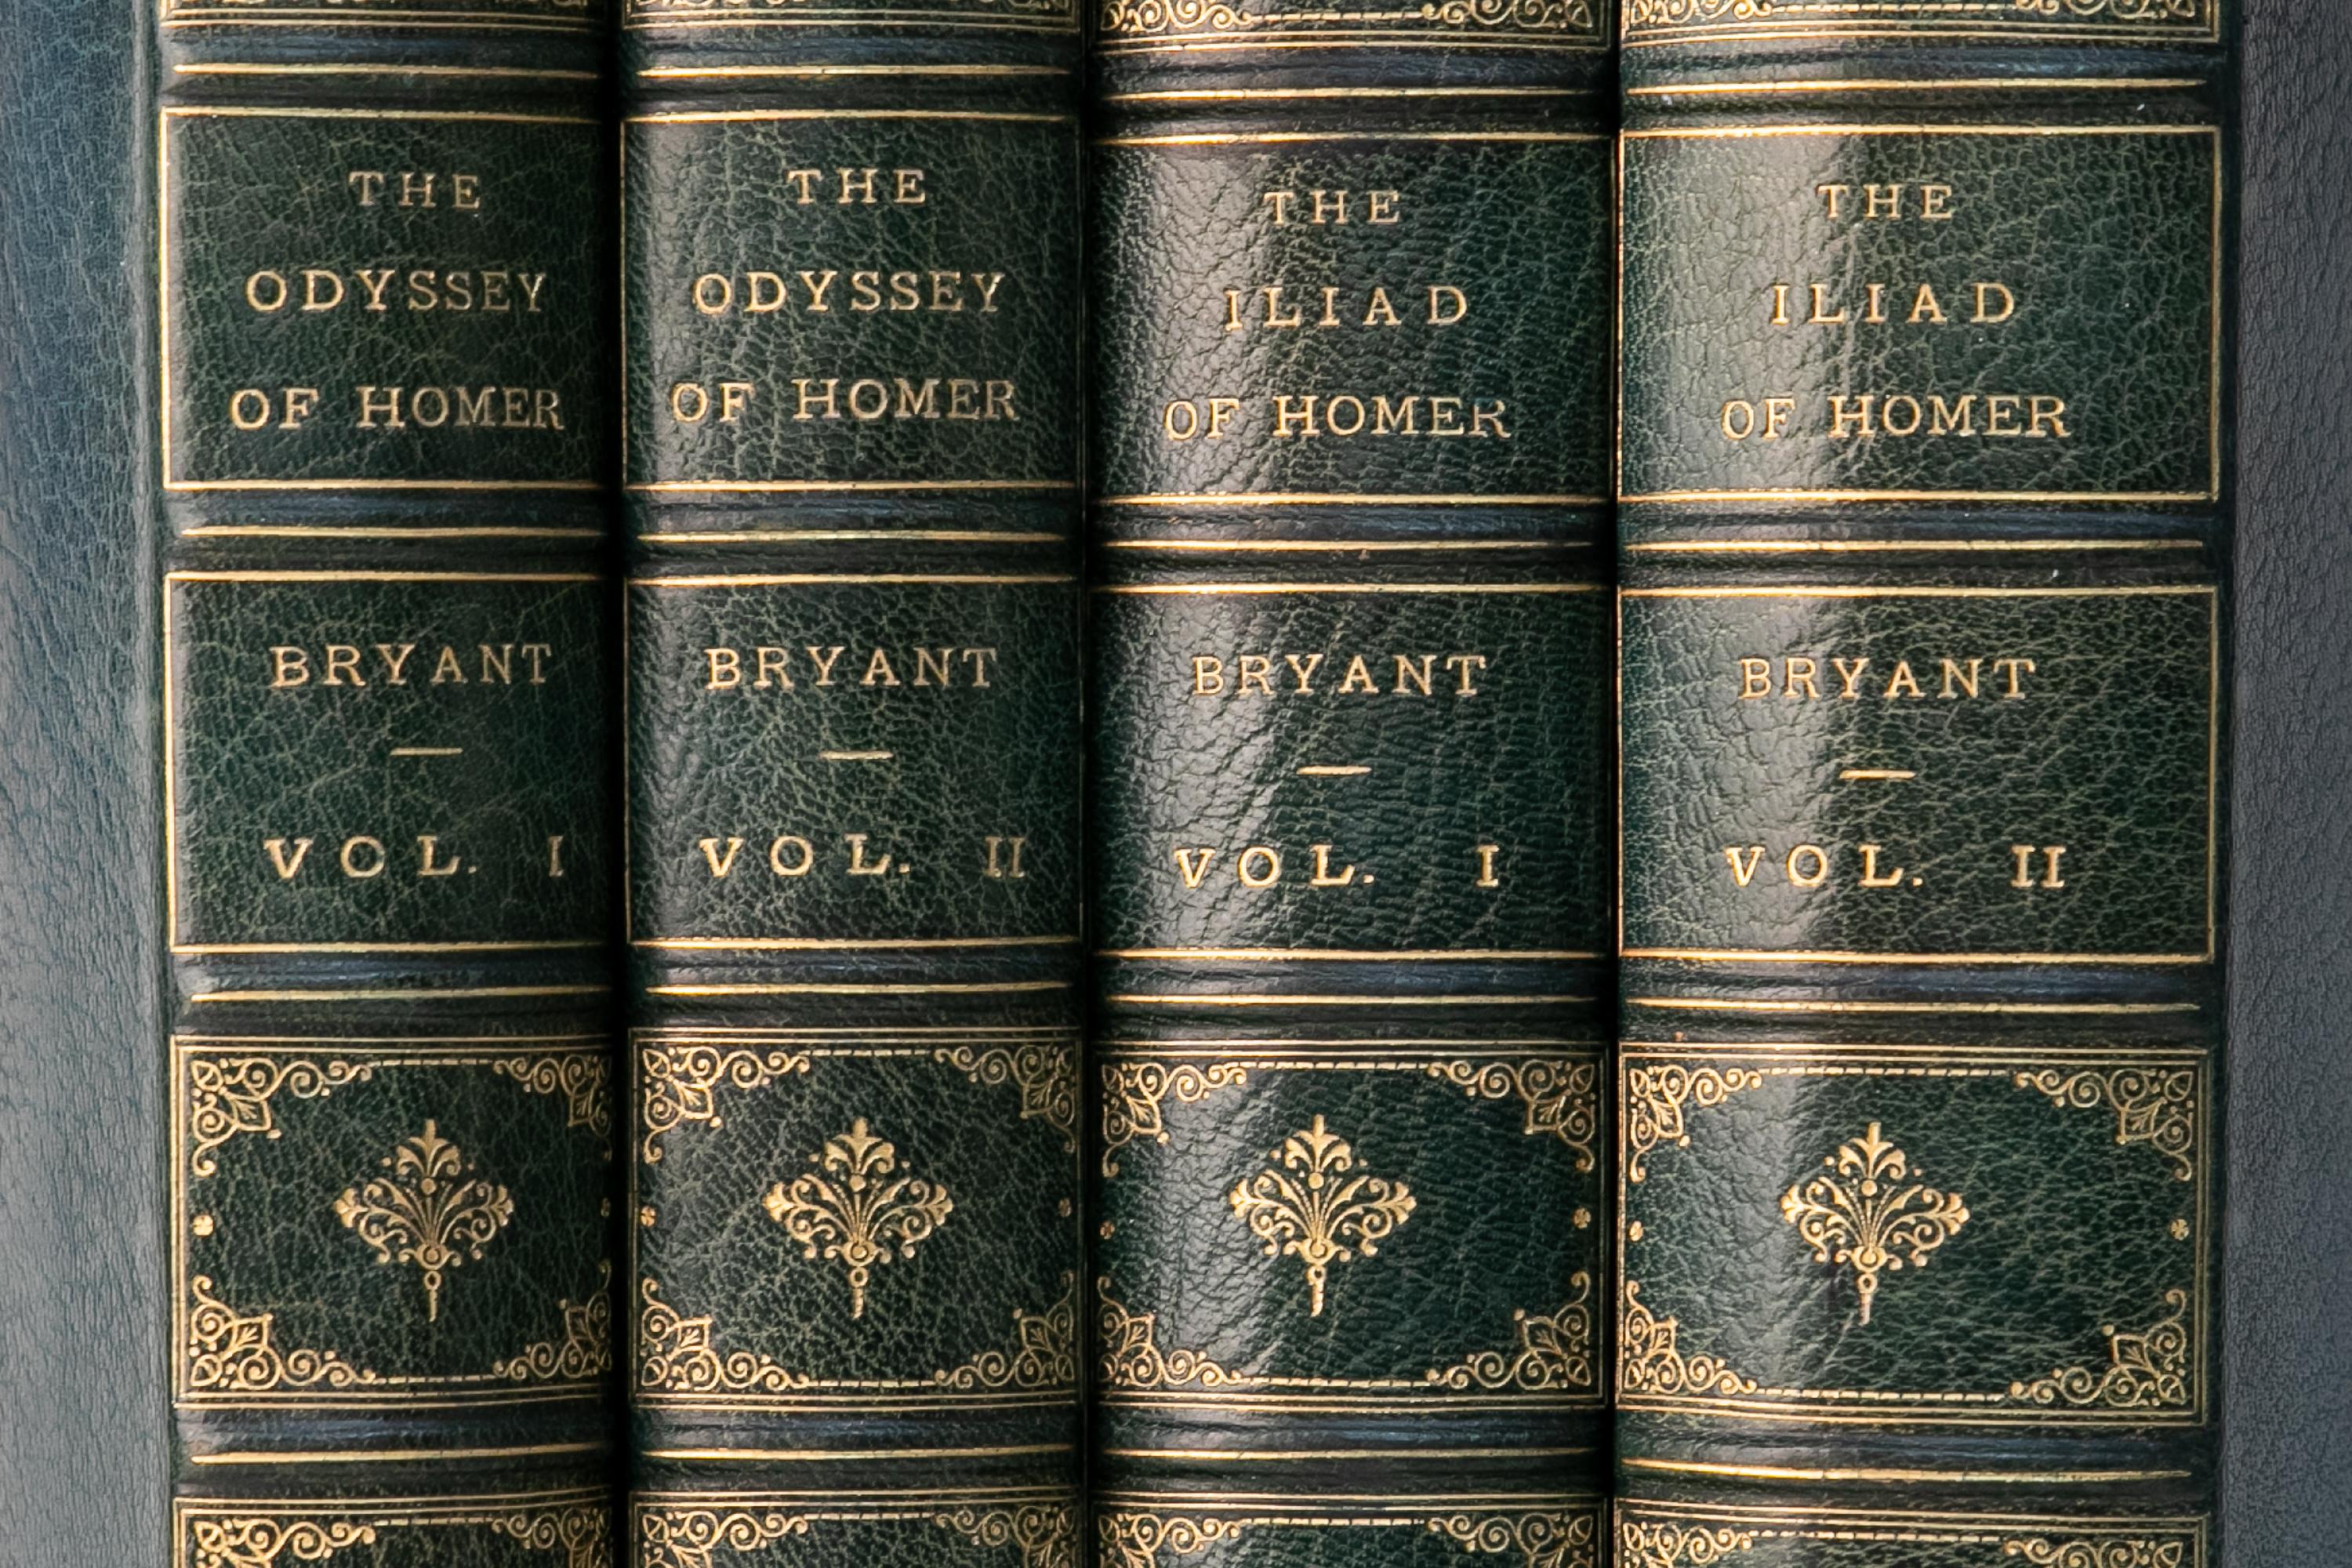 19th Century 4 Volumes. Homer, The Iliad and The Odyssey.